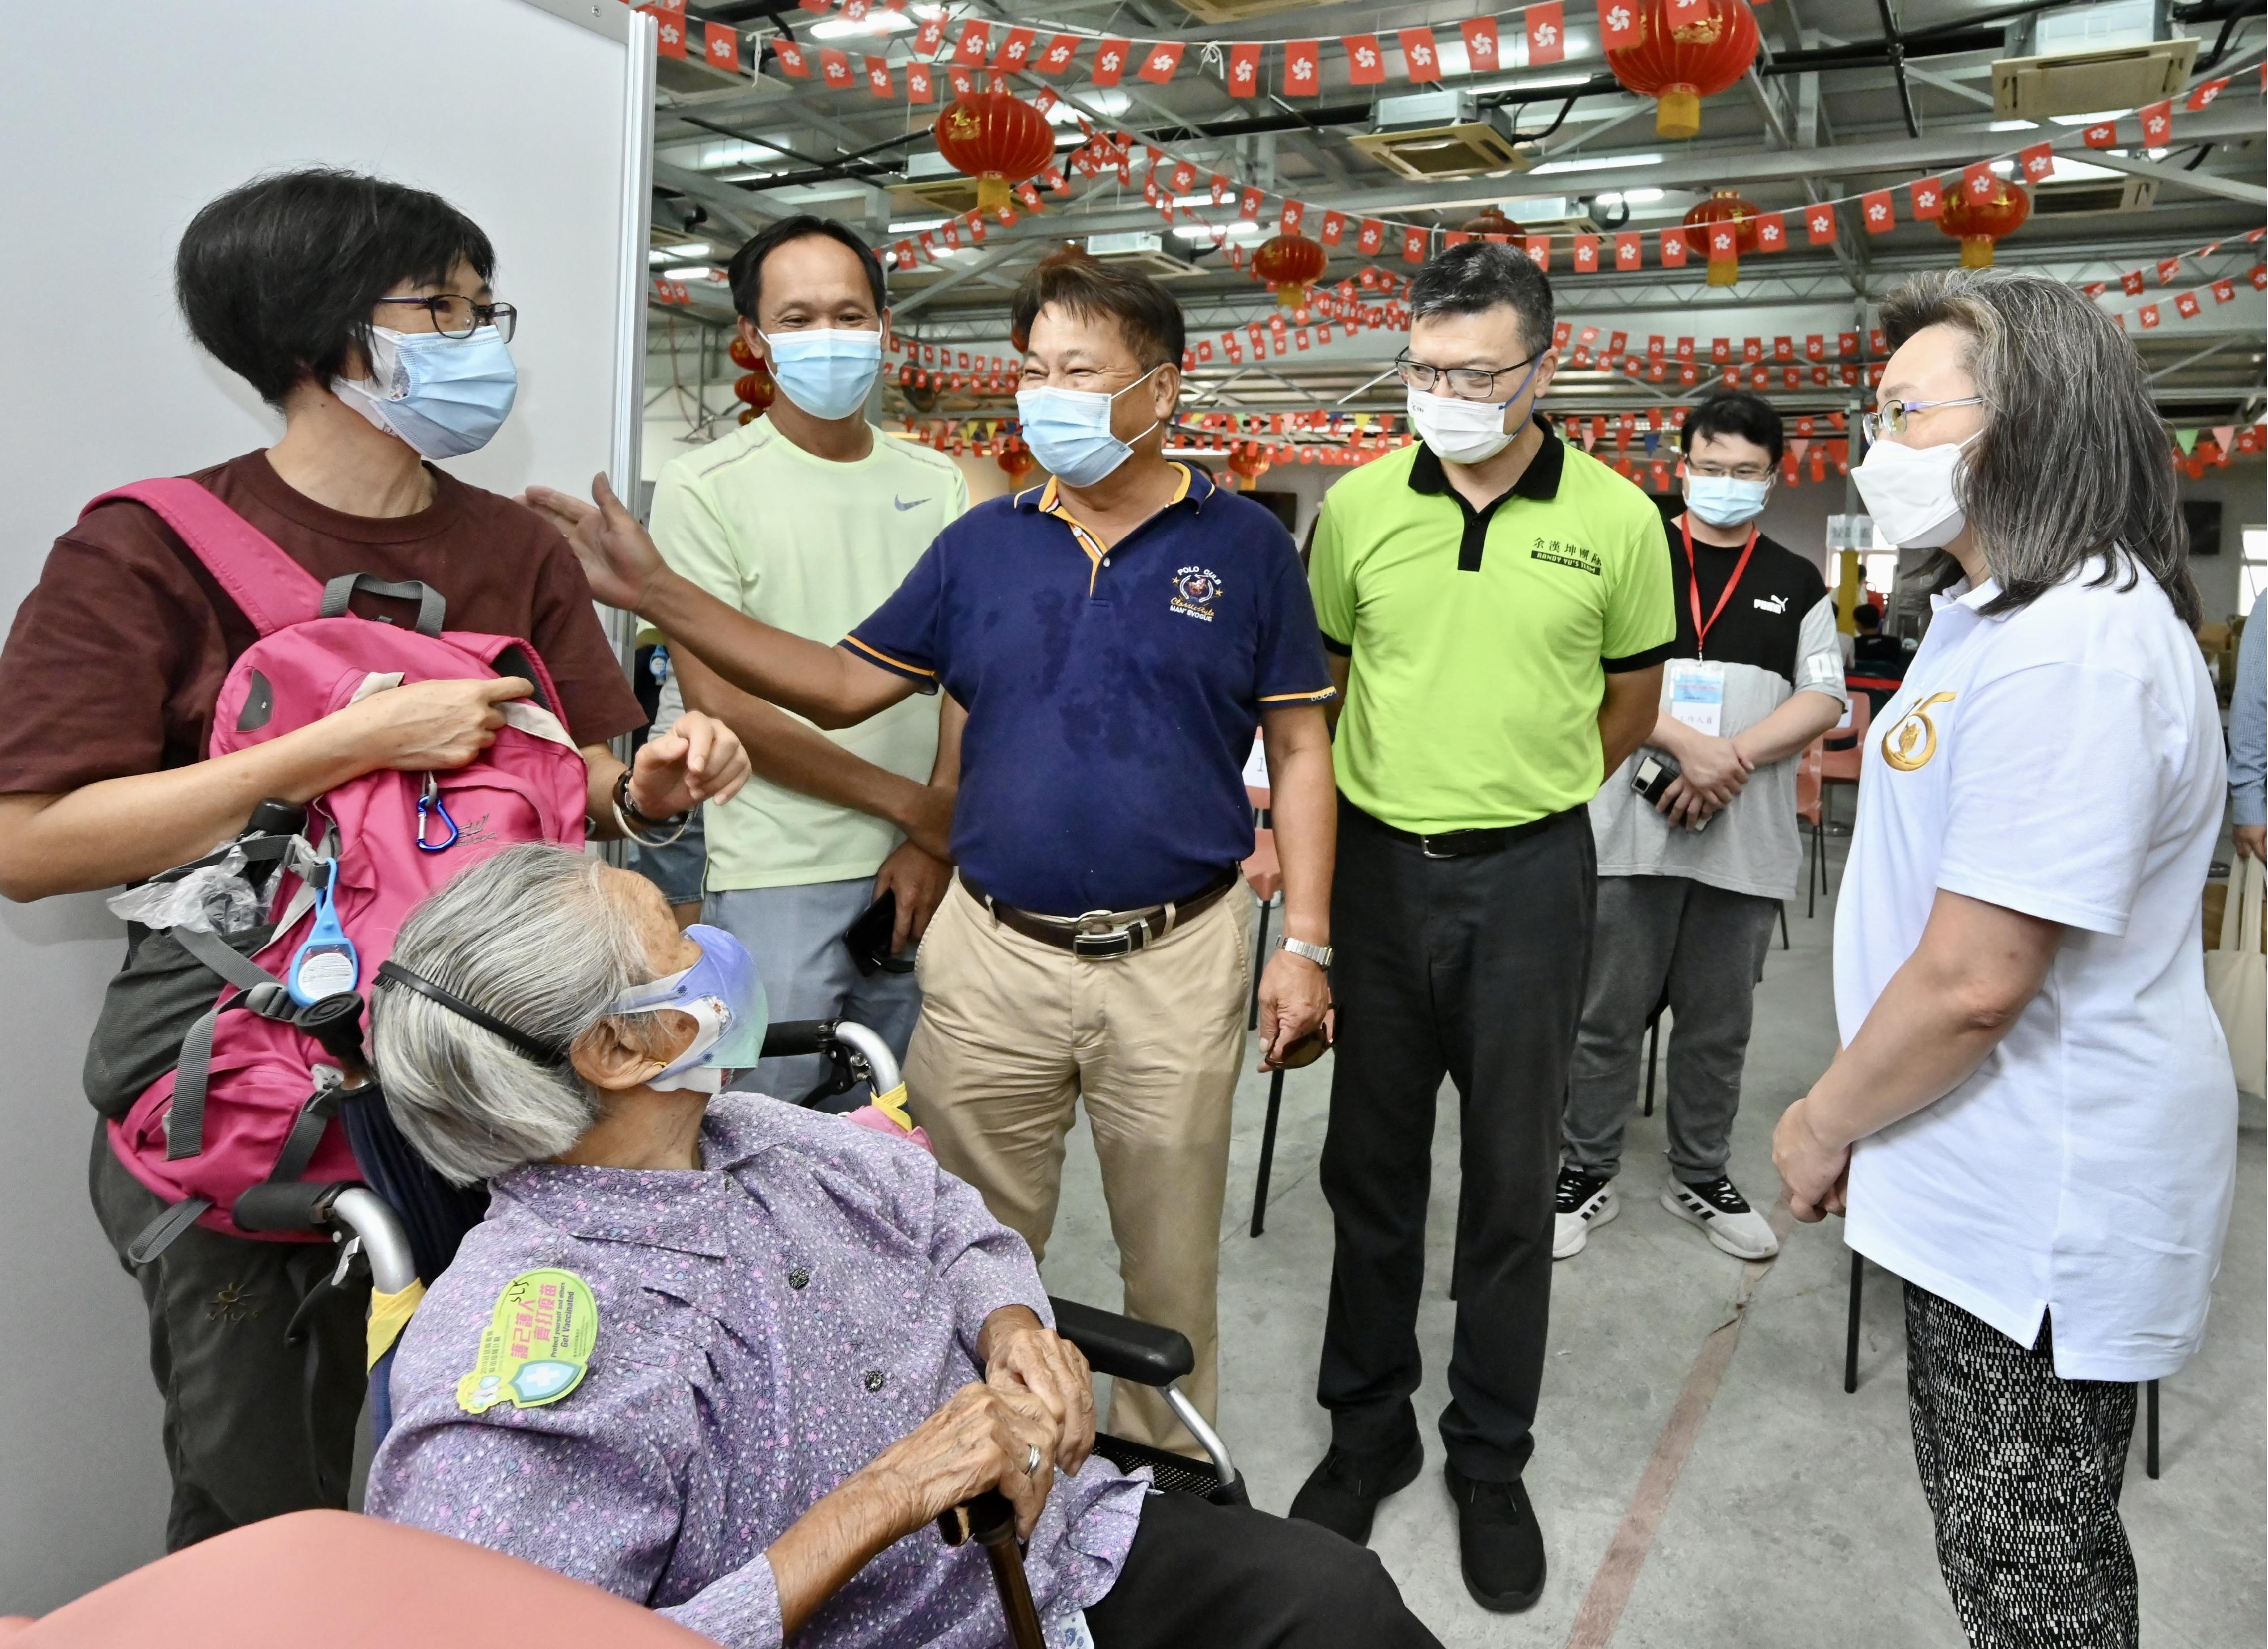 The Secretary for the Civil Service, Mrs Ingrid Yeung, today (August 20) led an outreach COVID-19 vaccination team to Mui Wo Recreation Centre to provide the Sinovac vaccination service to more than 190 residents of Mui Wo and southern Lantau Island. Photo shows Mrs Yeung (first right) and a 96-year-old elderly woman who has received her third dose of vaccine. Looking on are the Chairman of the Mui Wo Rural Committee, Mr Wong Man-hon (standing, second left), the Chairman of the South Lantao Rural Committee, Mr Ho Chun-fai (standing, third left), and the Chairman of the Islands District Council, Mr Randy Yu (standing, fourth left).